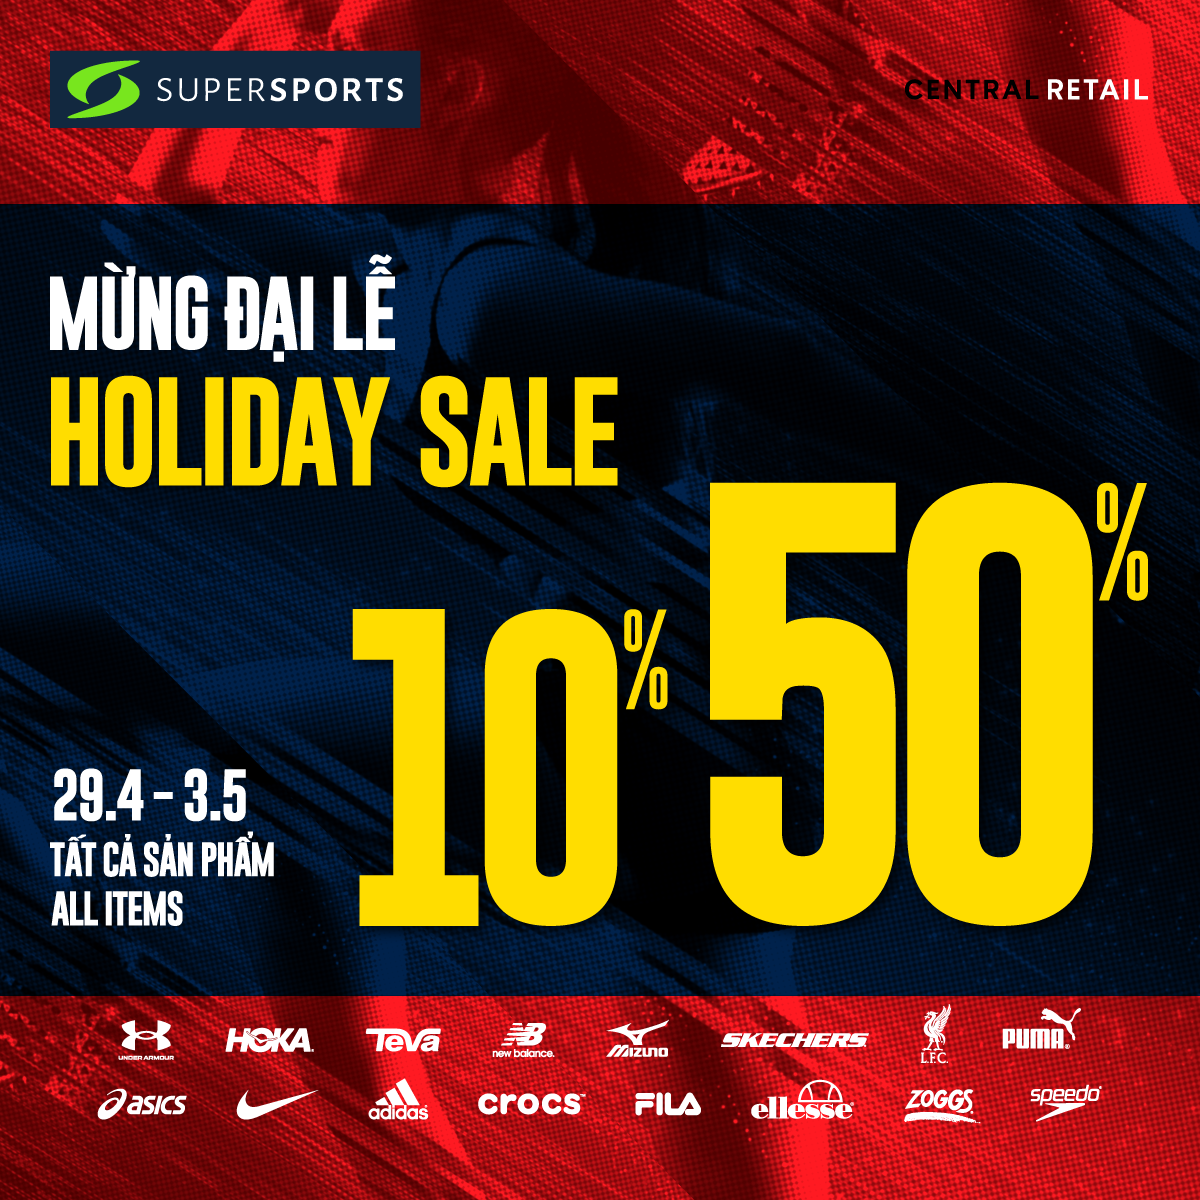 🎉ENJOY YOUR HOLIDAY WITH GREAT PROMOTION FROM SUPERSPORTS: SALE ALL ITEMS FROM 10%-50%